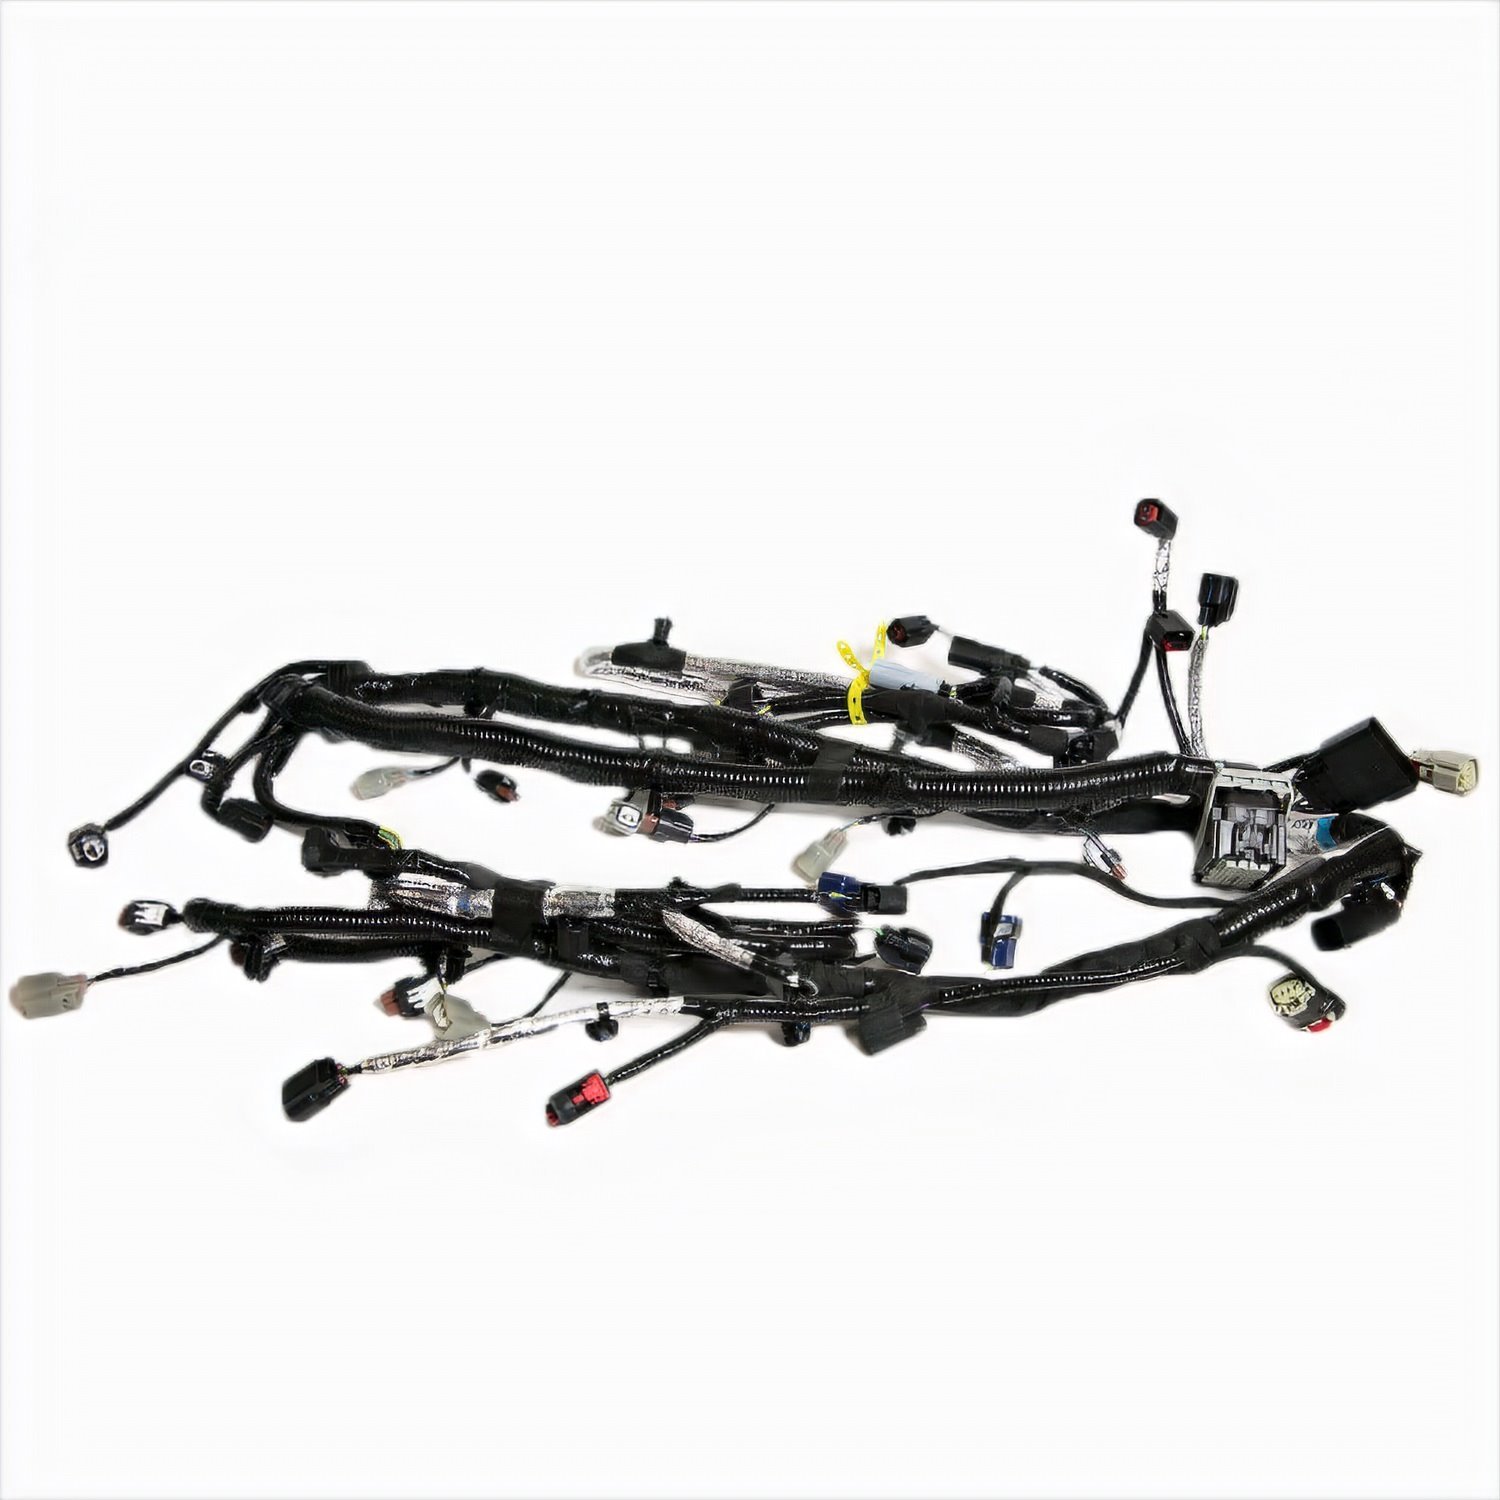 Engine Wiring Harness 2016-2017 Ford Mustang 5.0L Coyote Engines w/Automatic Transmissions